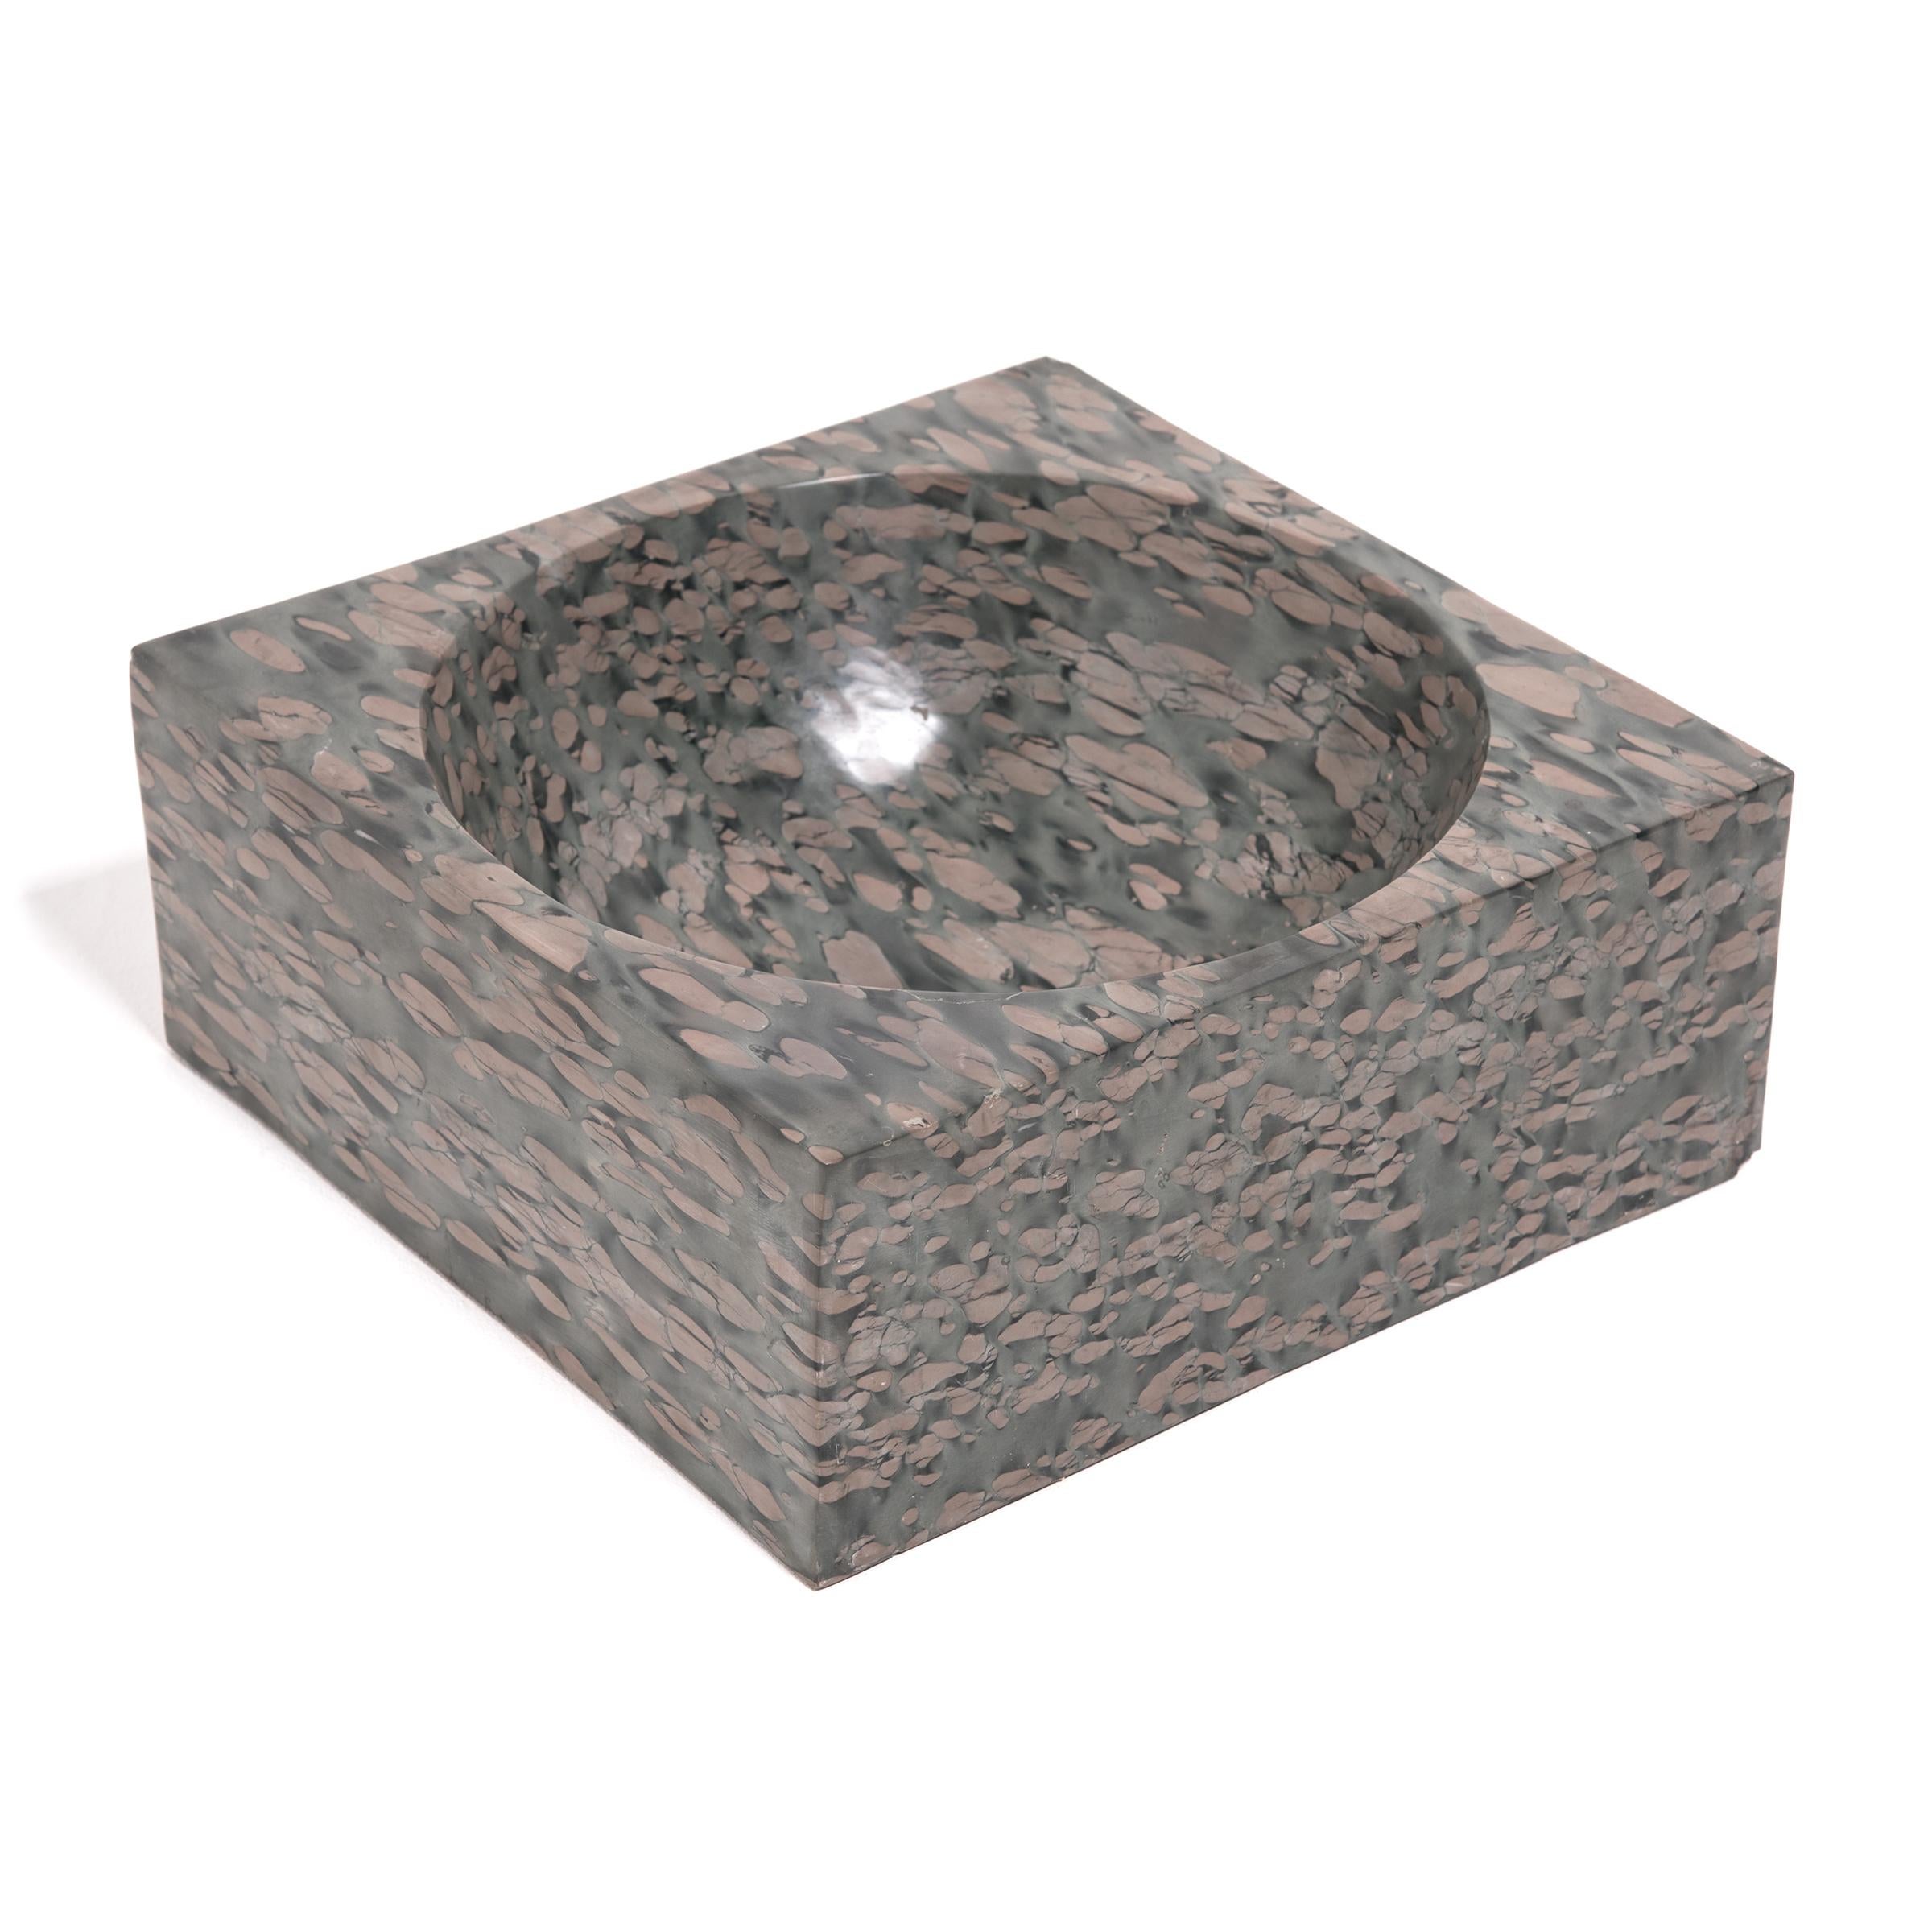 Hand-Carved Chinese Squared Zhenzhu Stone Basin For Sale